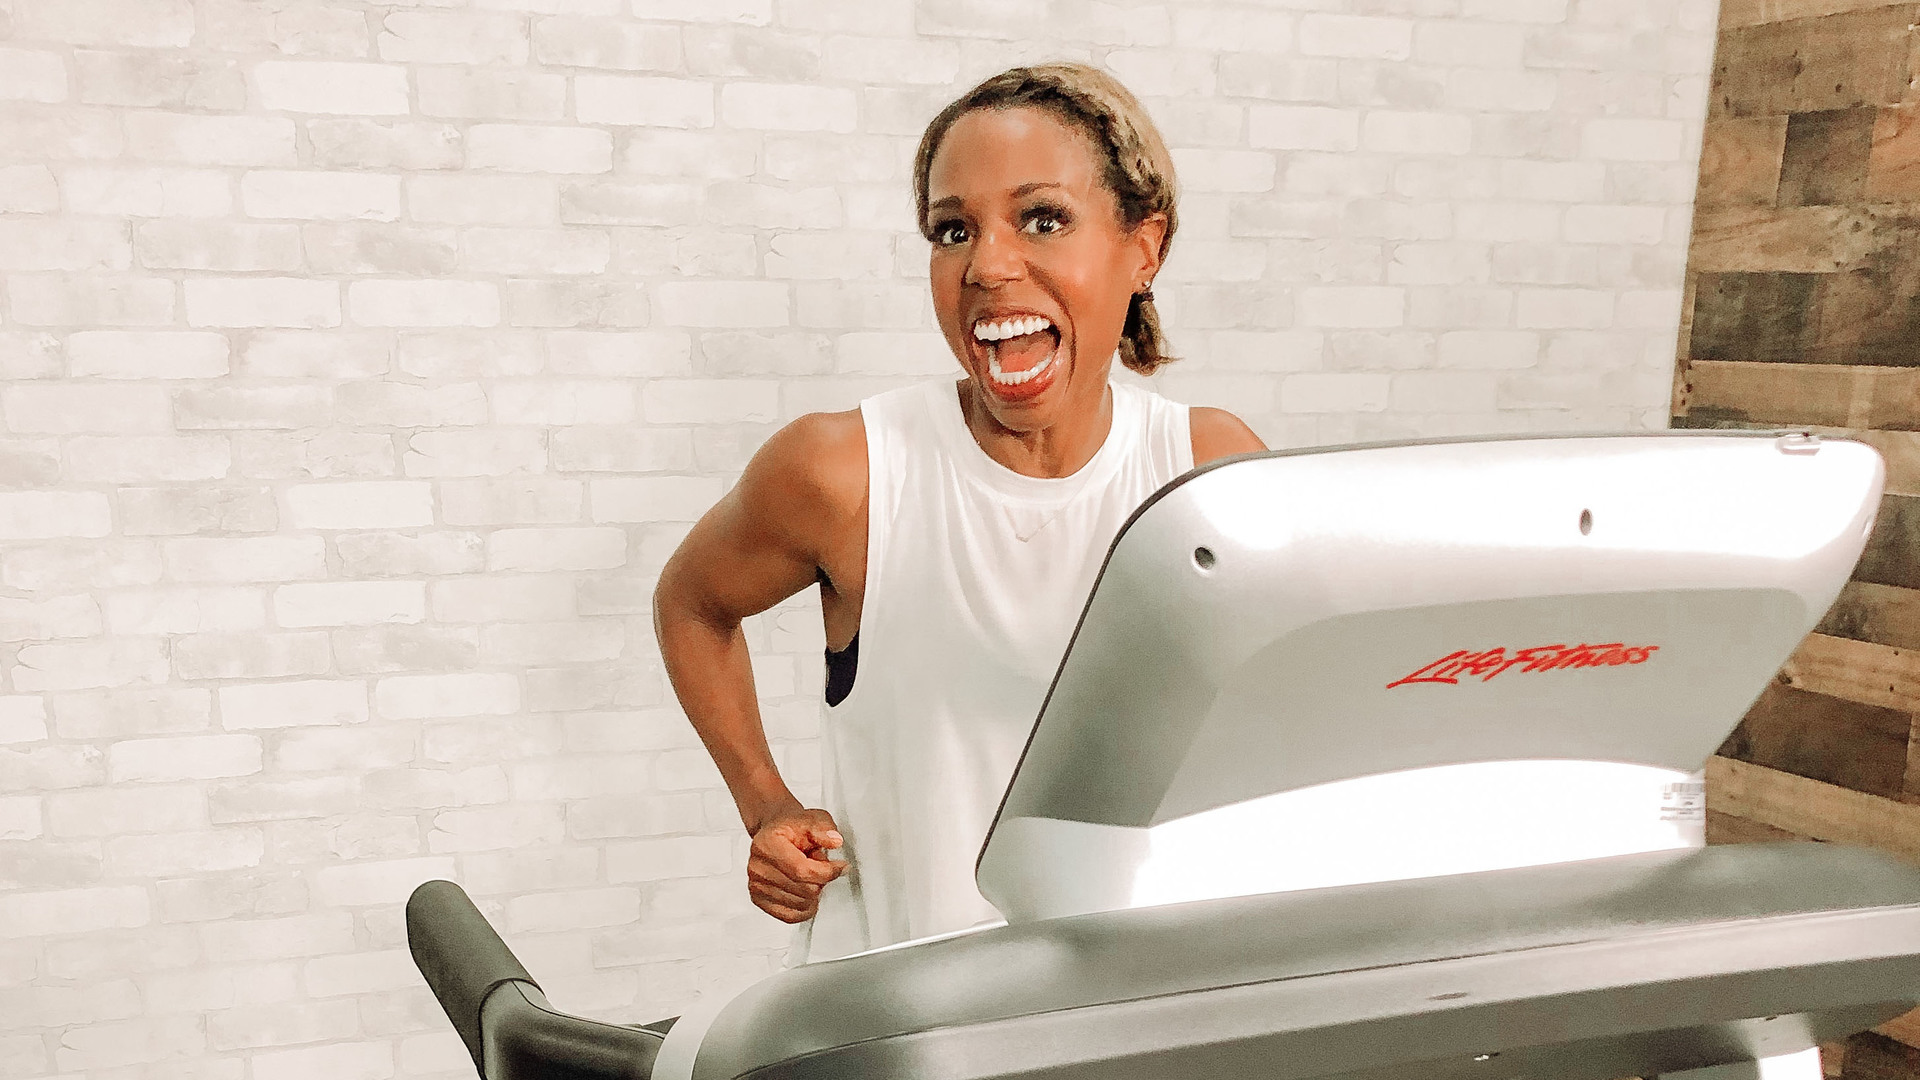 Woman working out on a treadmill